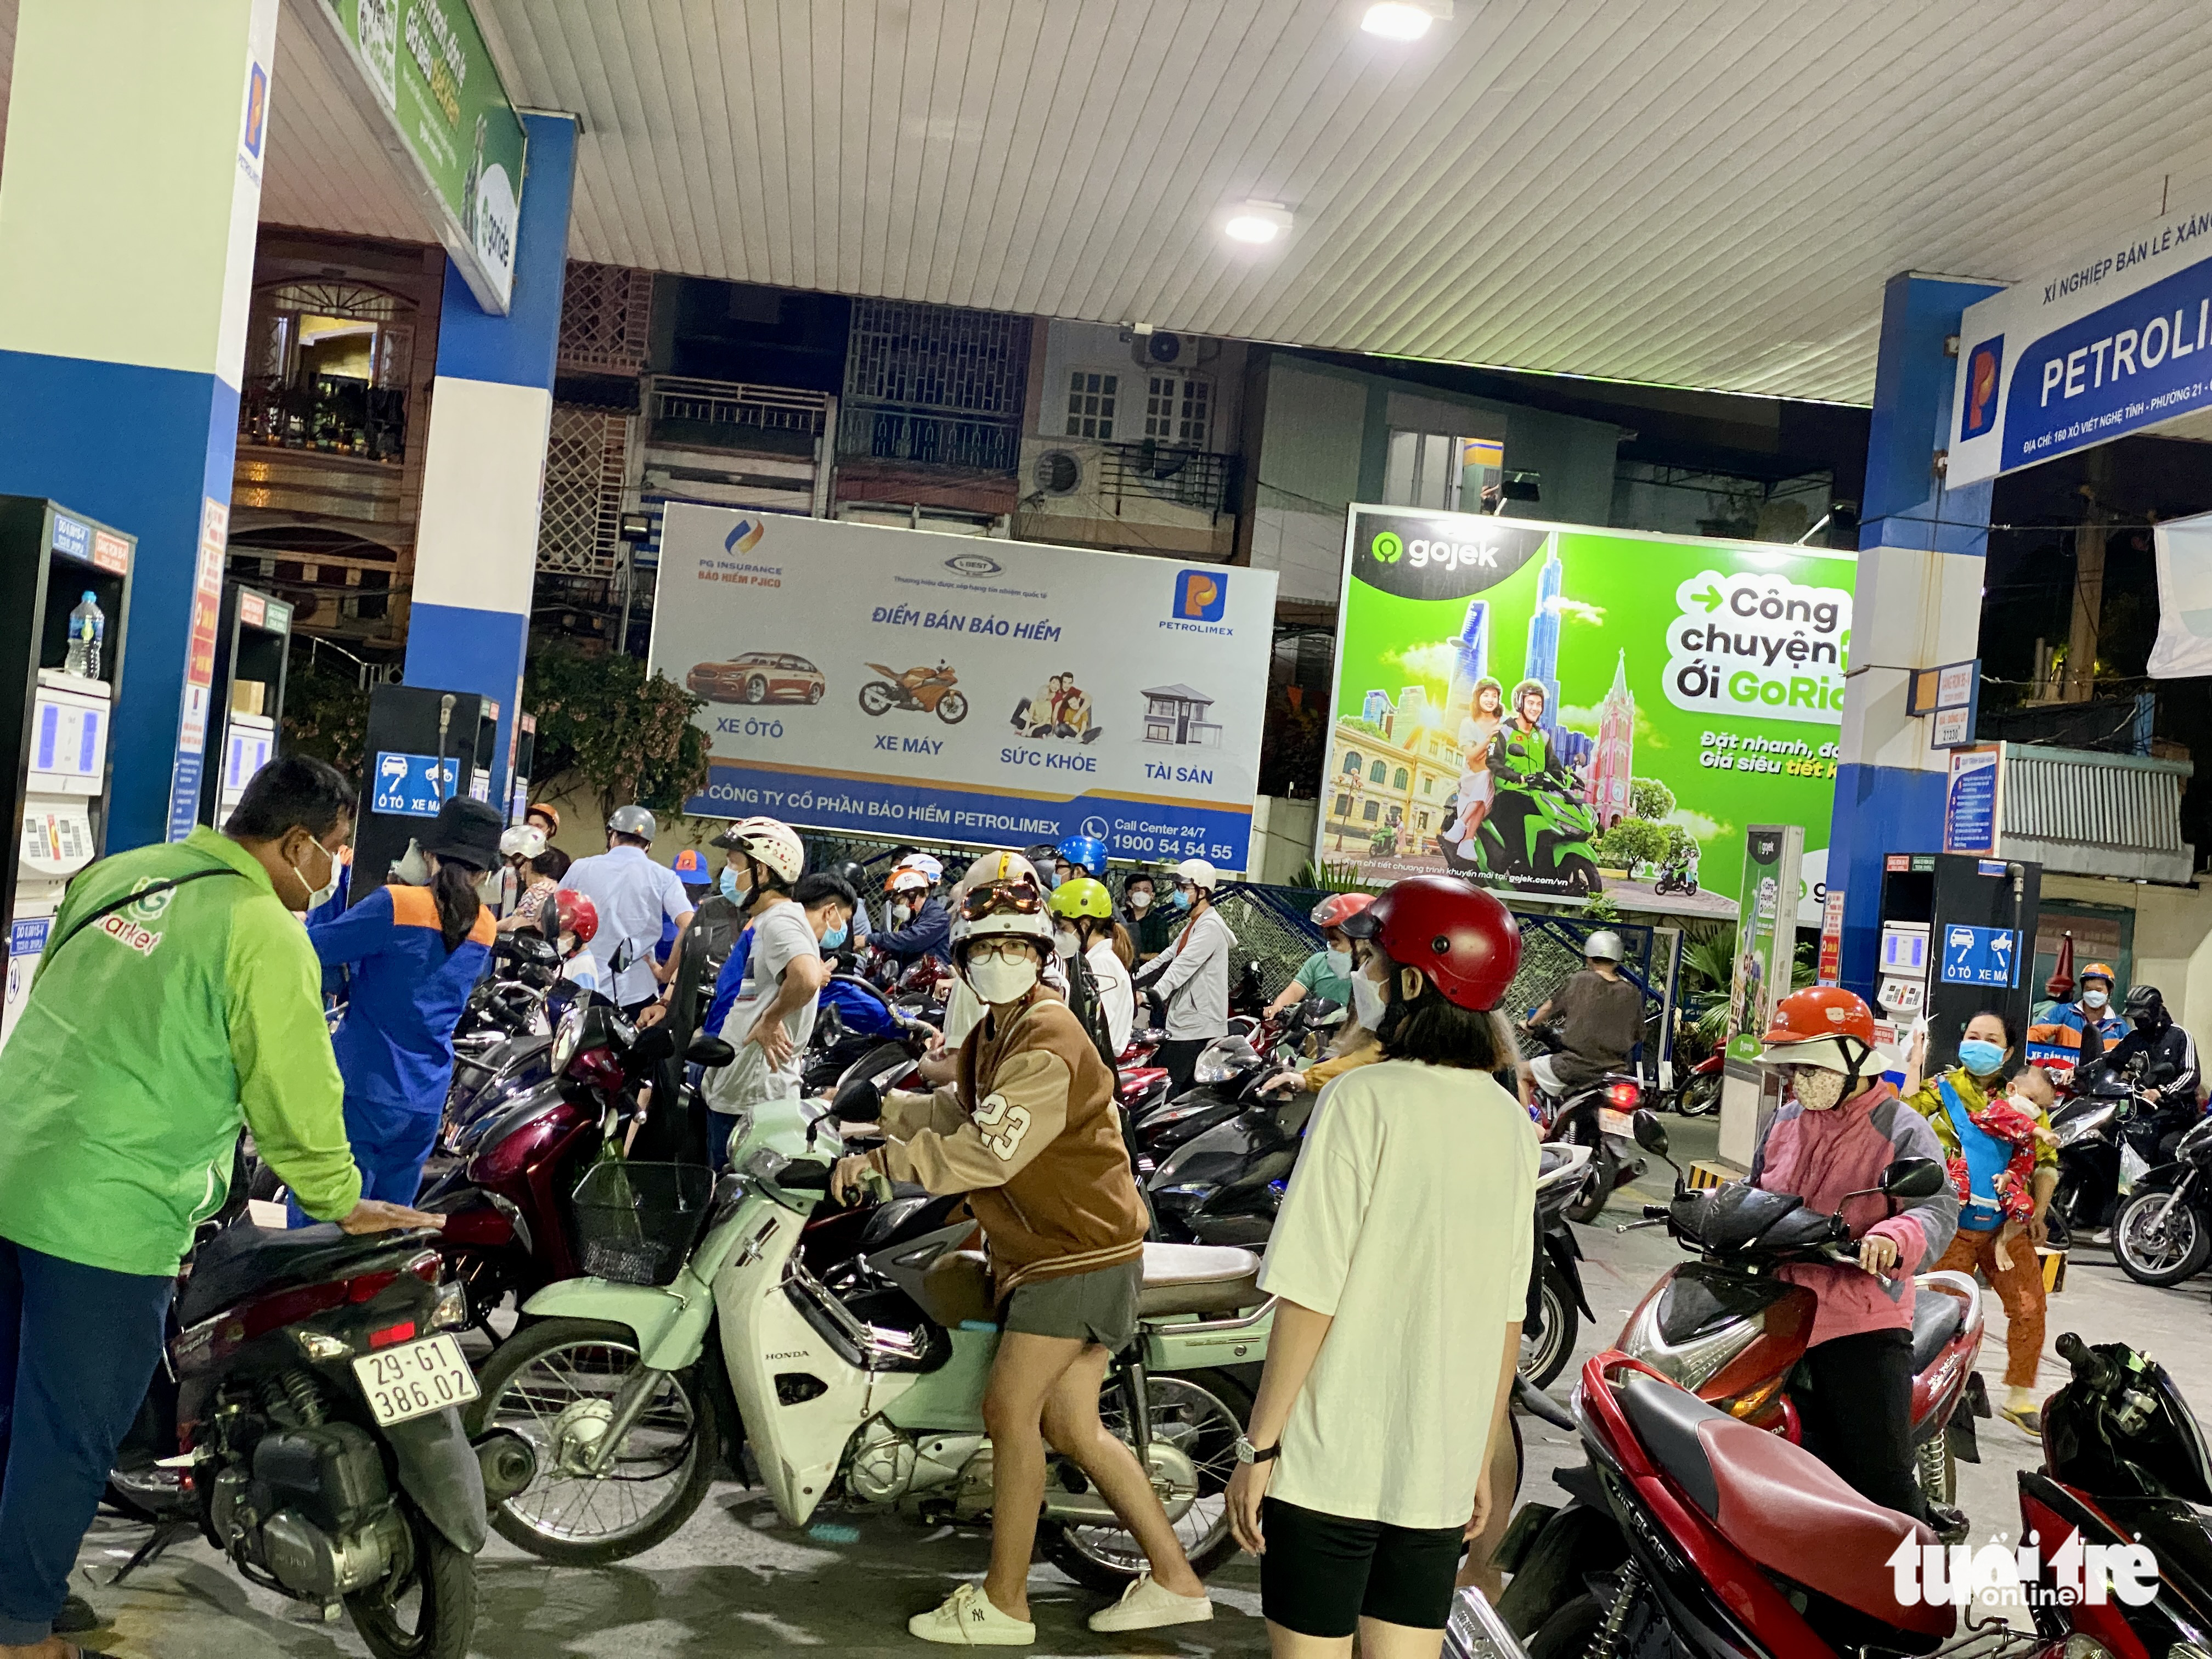 People buy gasoline at a filling station in Binh Thanh District, Ho Chi Minh City, March 10, 2022. Photo: Bong Mai / Tuoi Tre